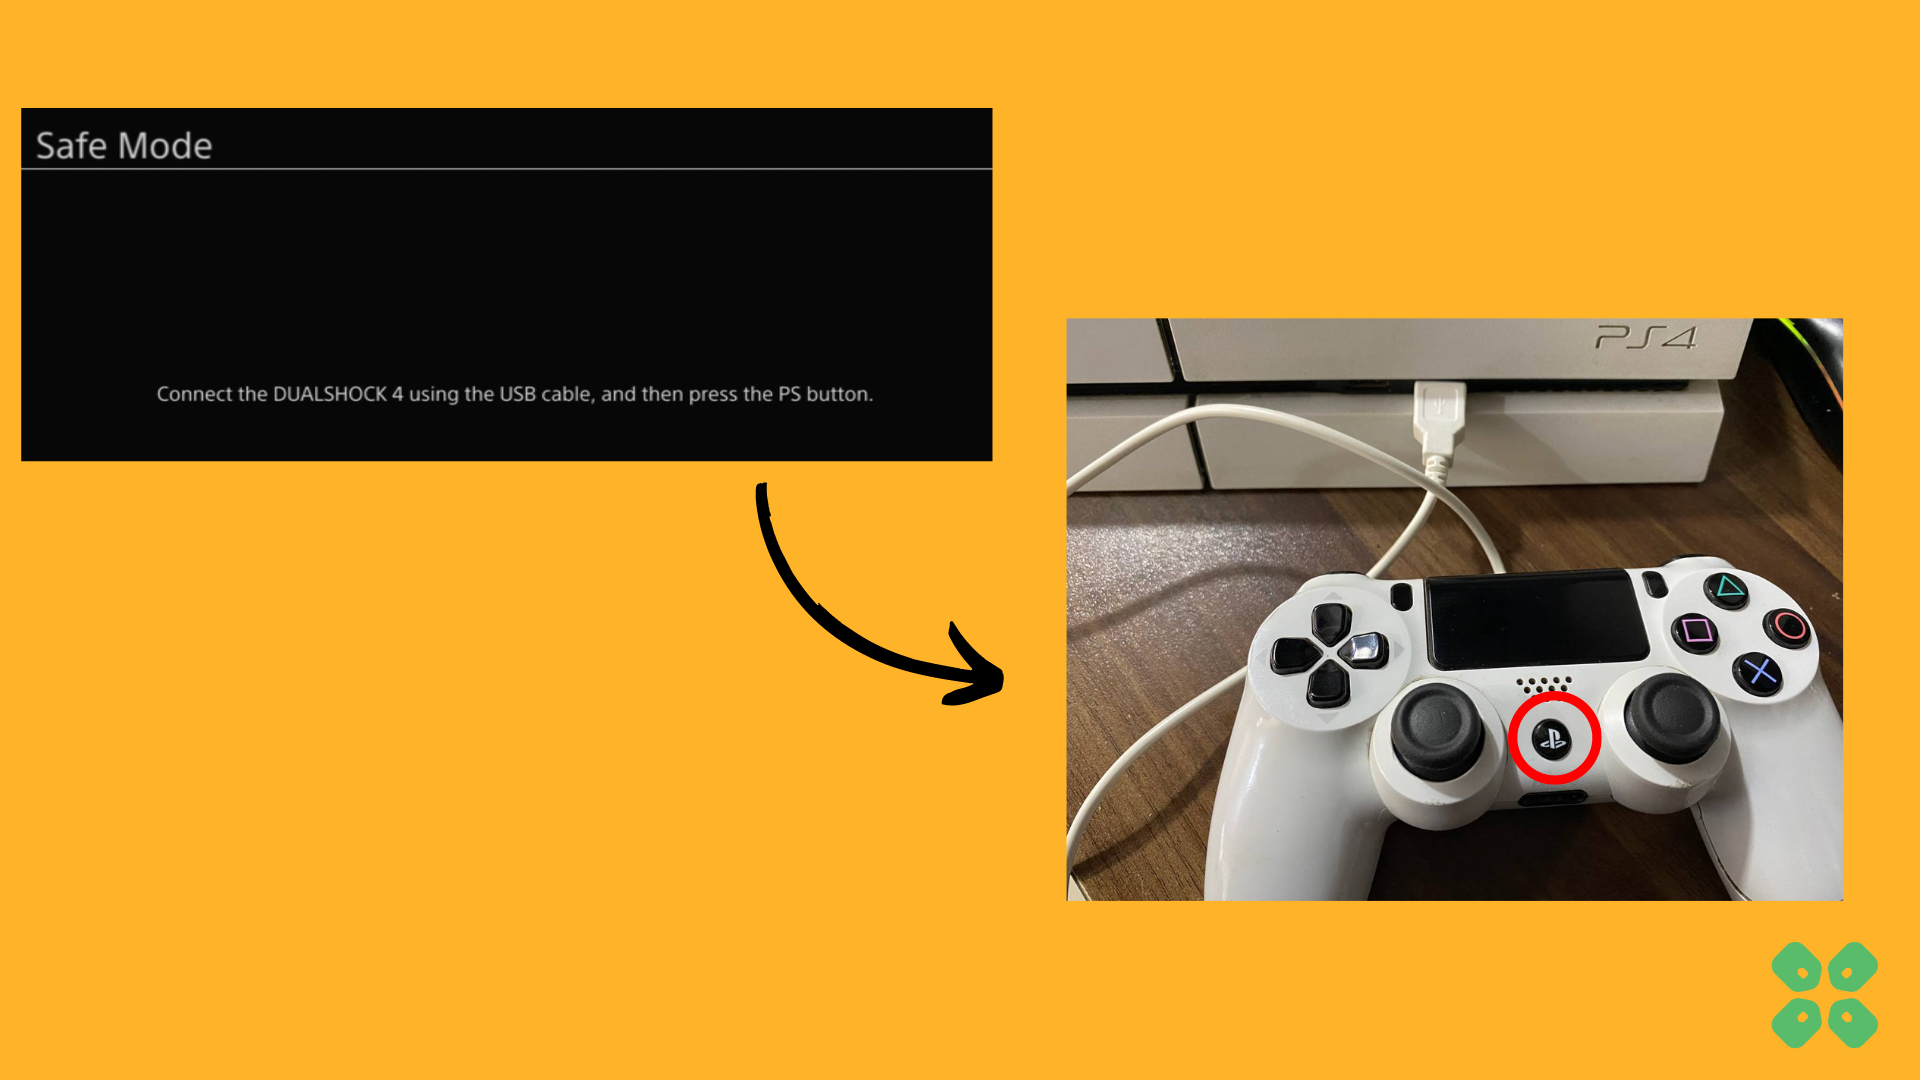 connect the PS4 controller using a usb cable